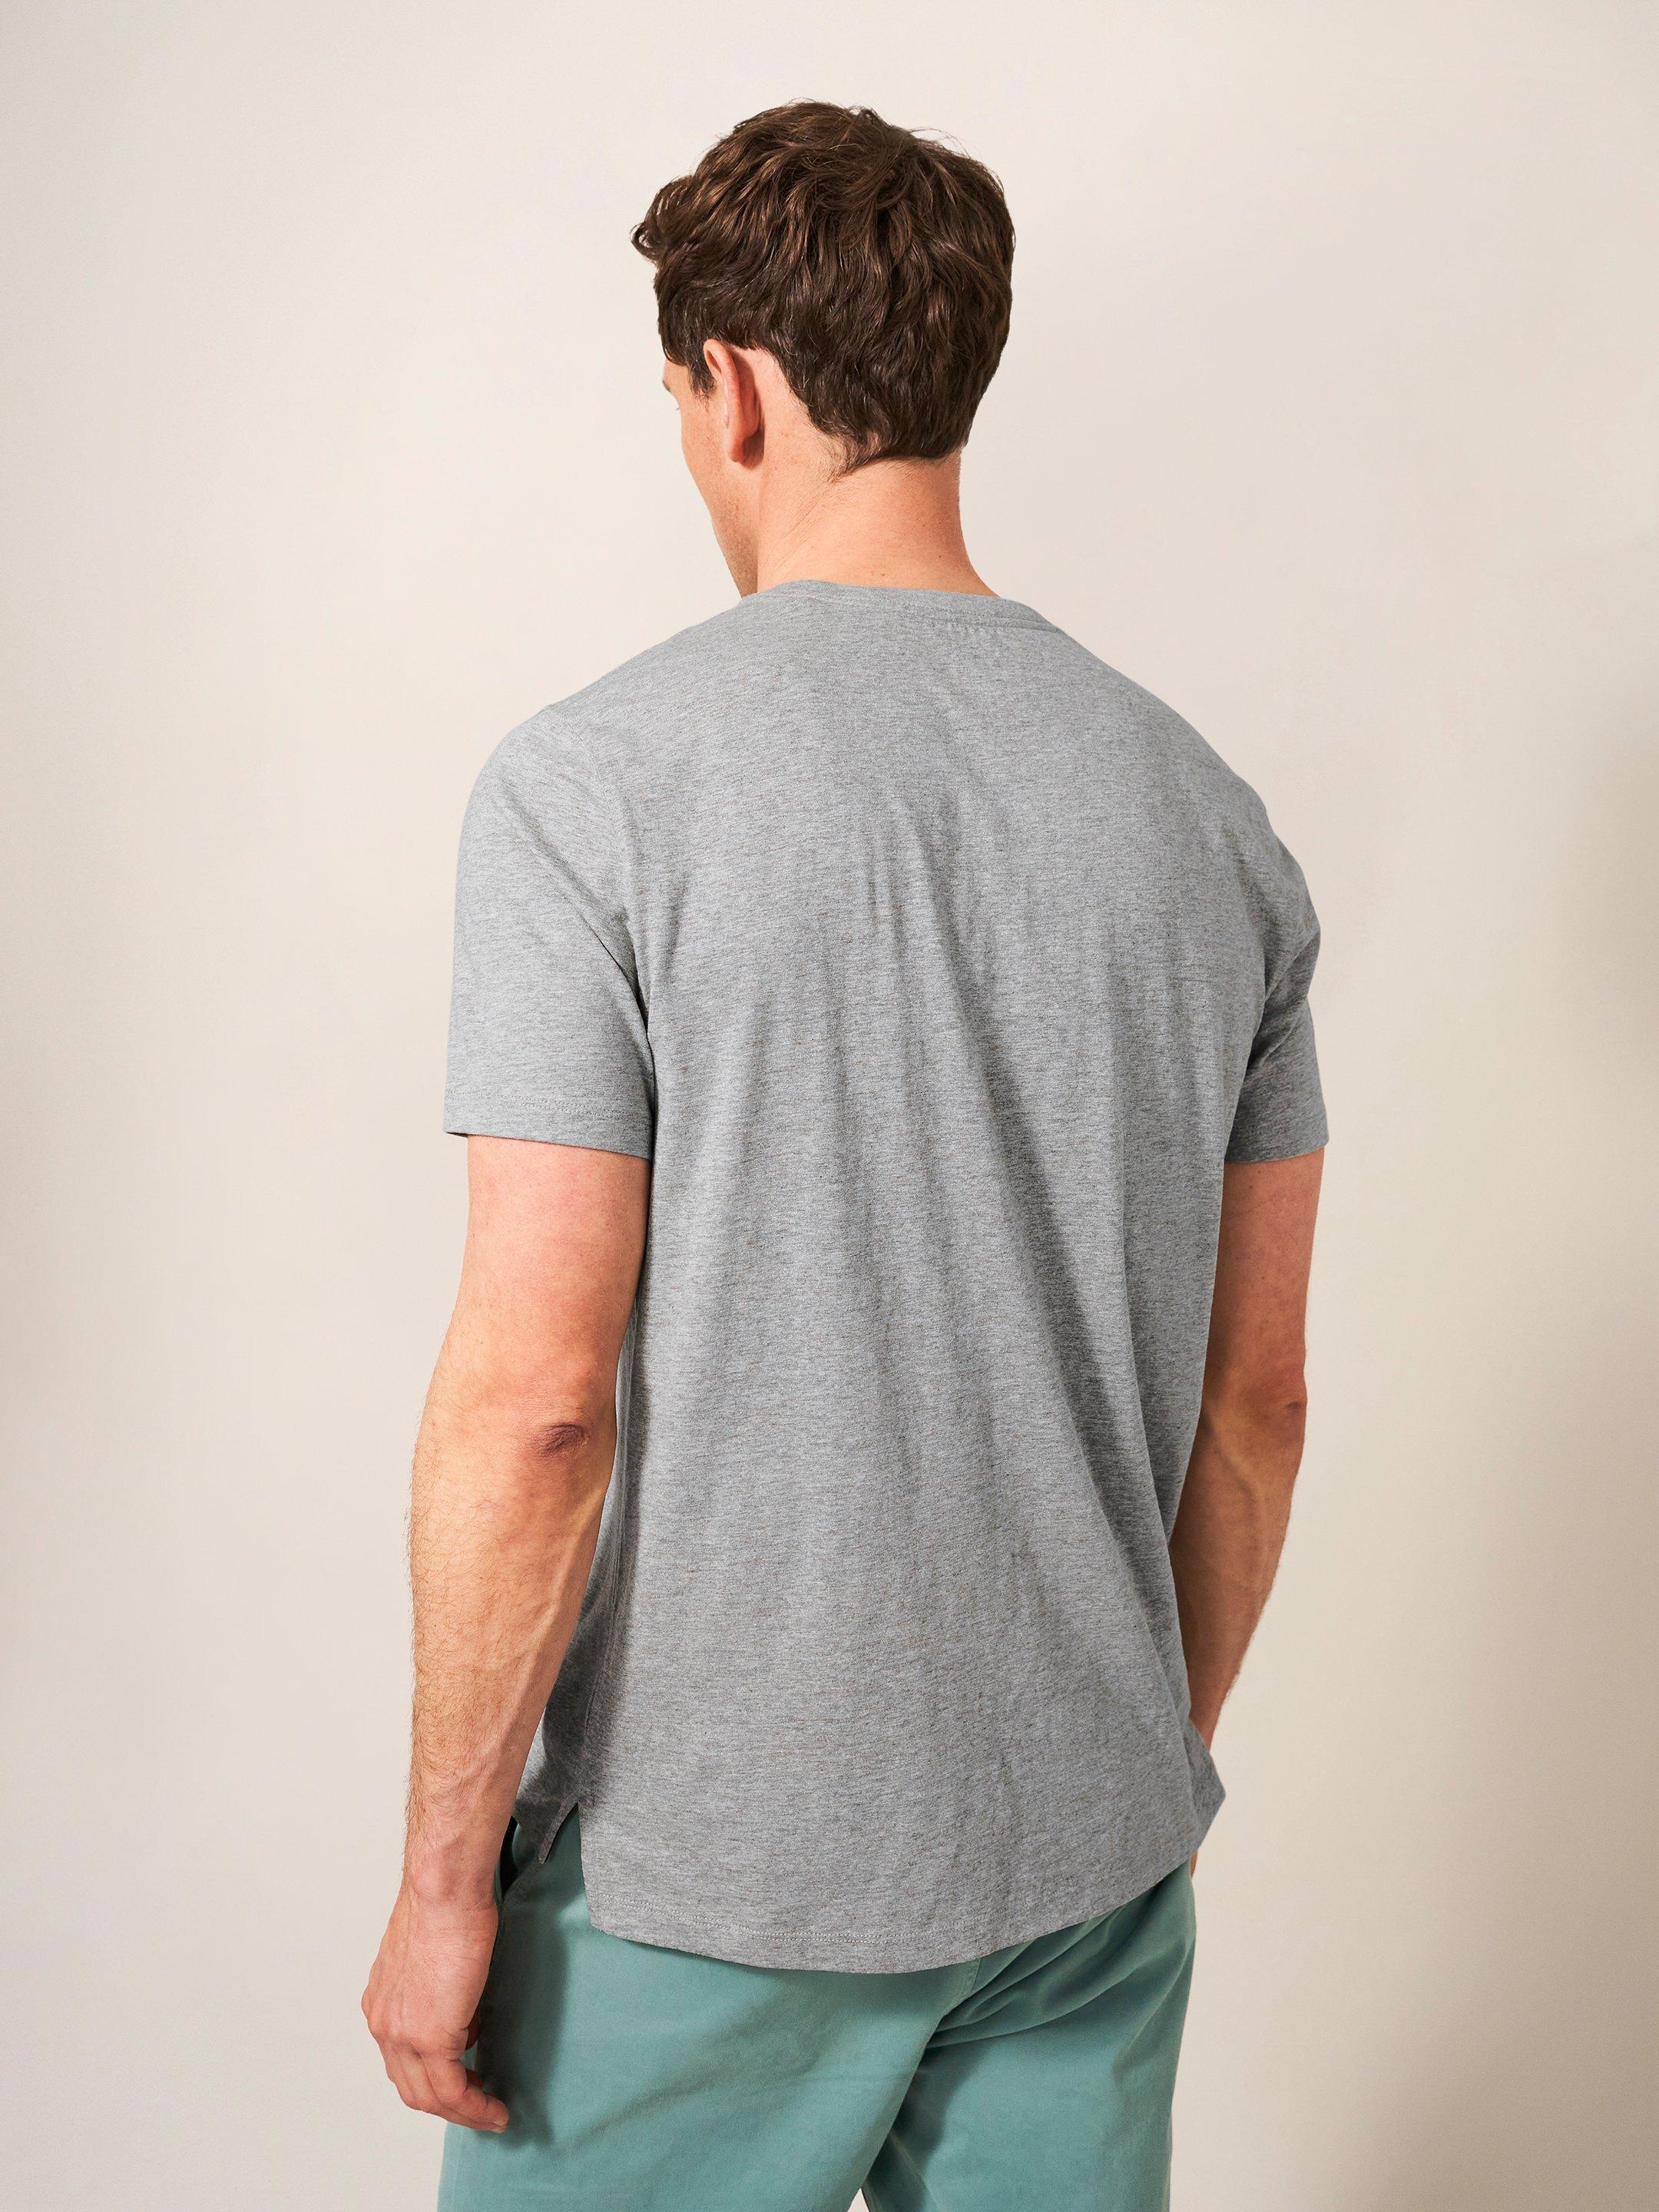 Sunset Surf Graphic Tee in GREY MARL - MODEL BACK